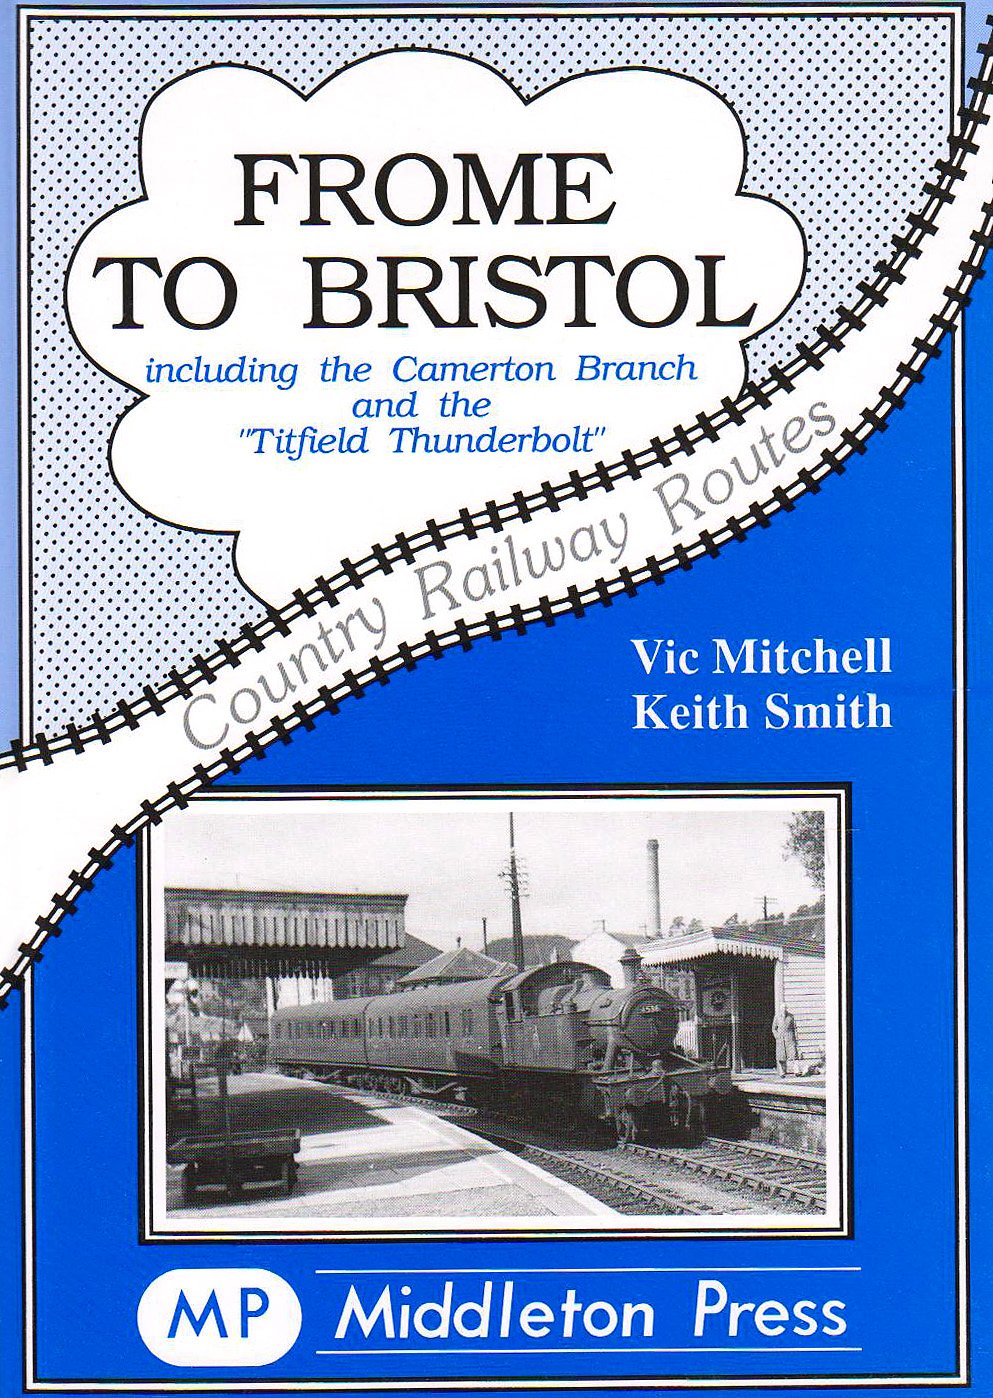 Country Railway Routes Frome to Bristol including the Camerton Branch